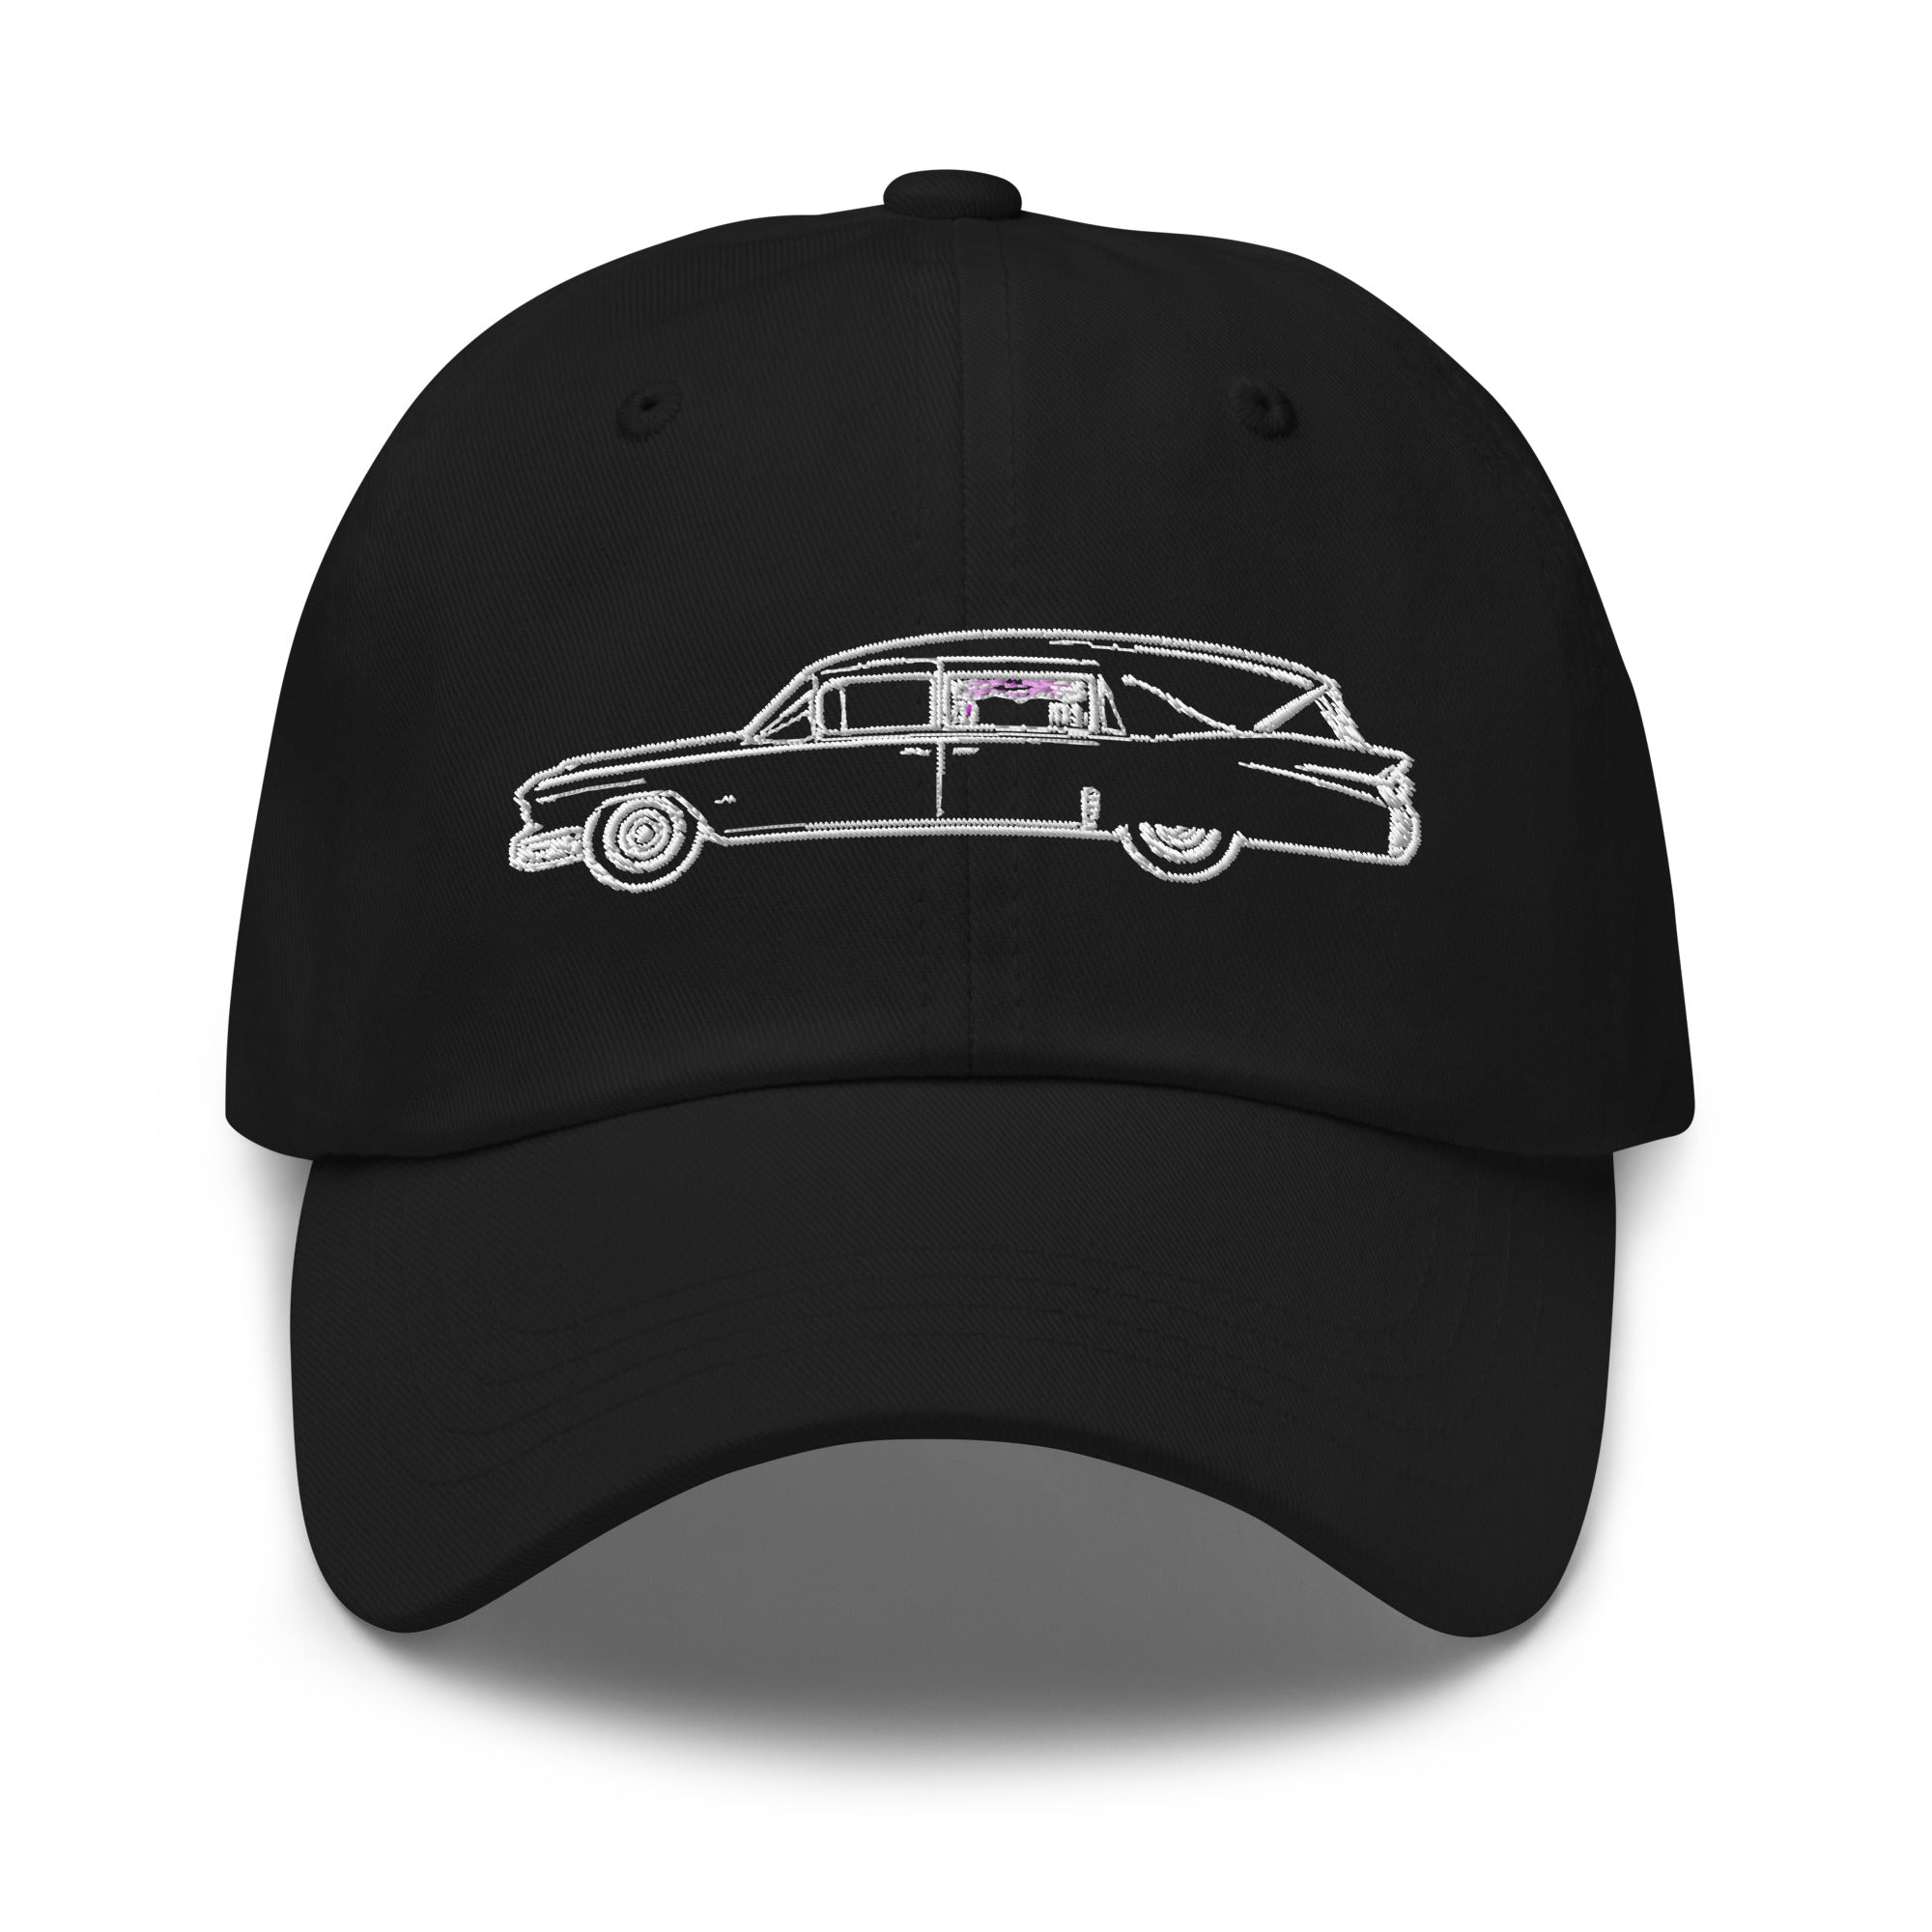 Hearse Funeral Car Embroidered Baseball Cap Casket Coach Dad hat - Edge of Life Designs